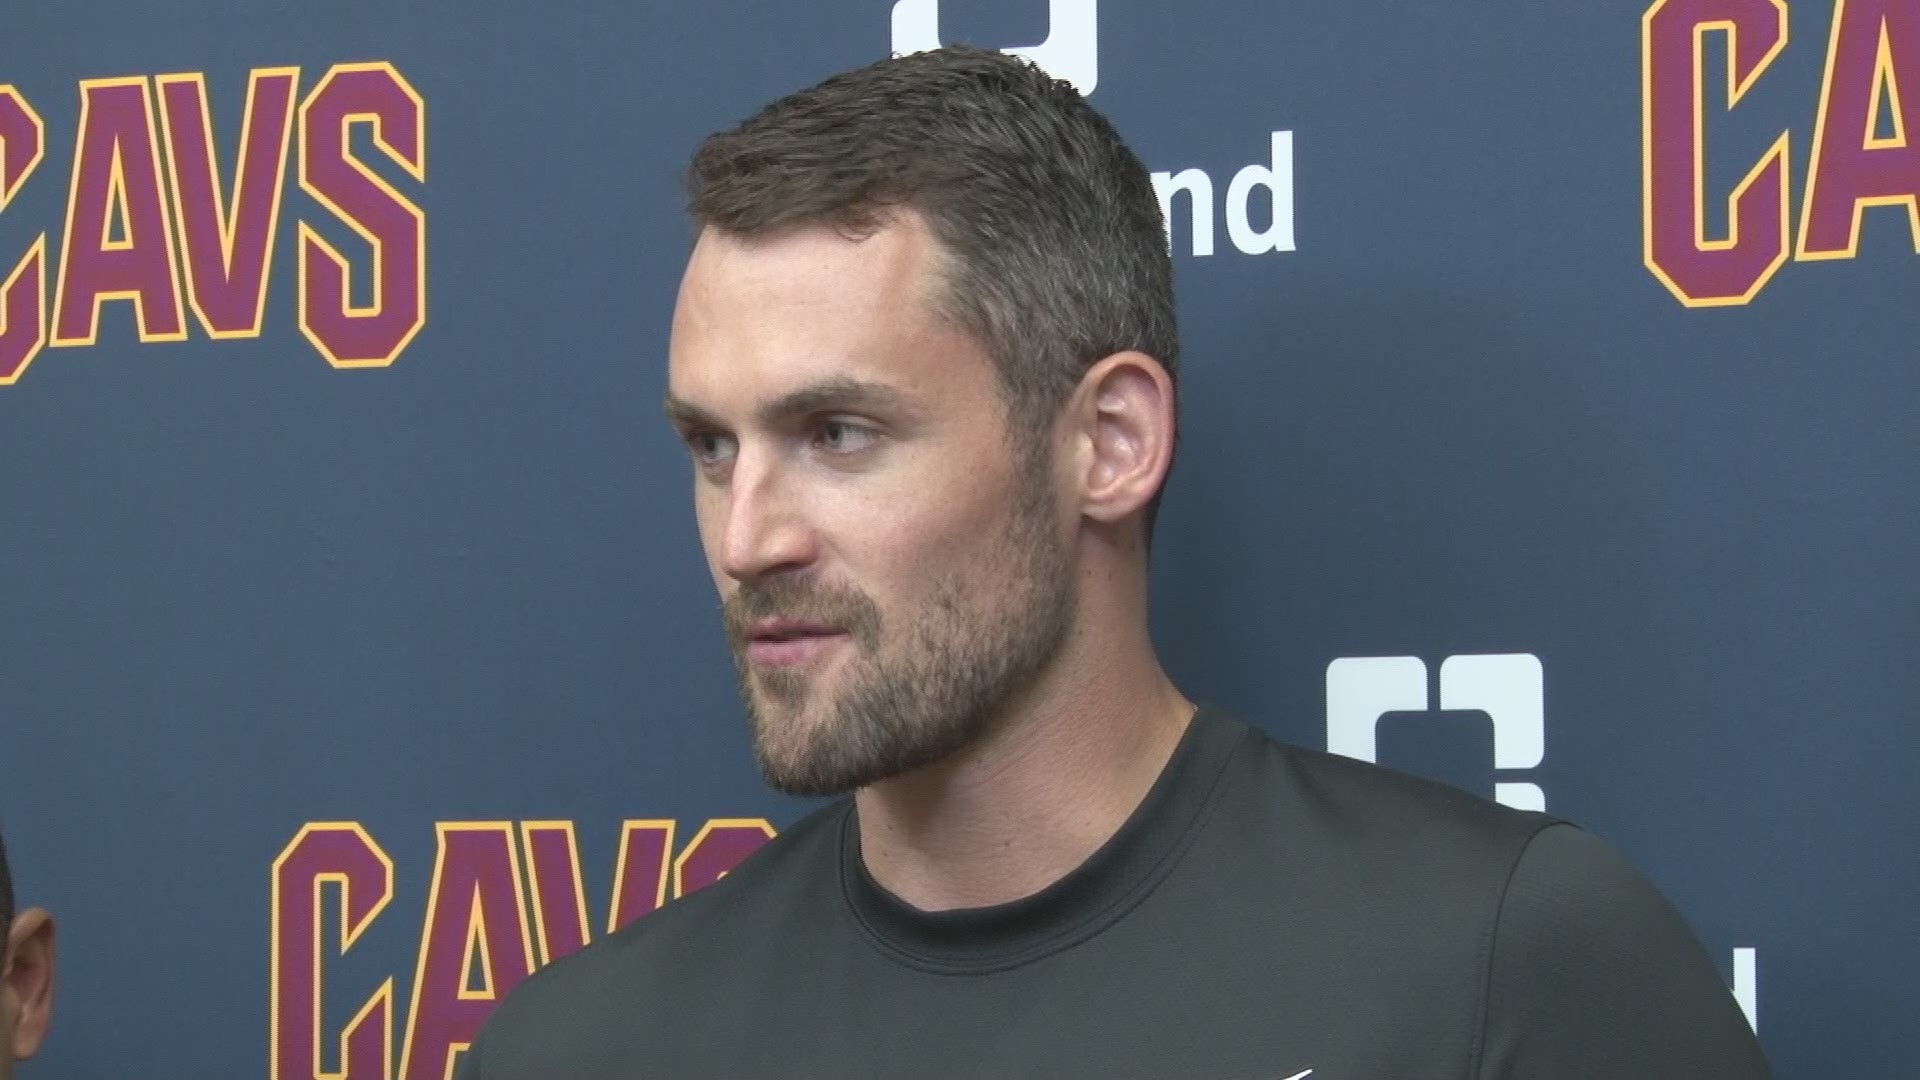 Kevin Love explains decision to sign contract extension with the Cleveland Cavaliers